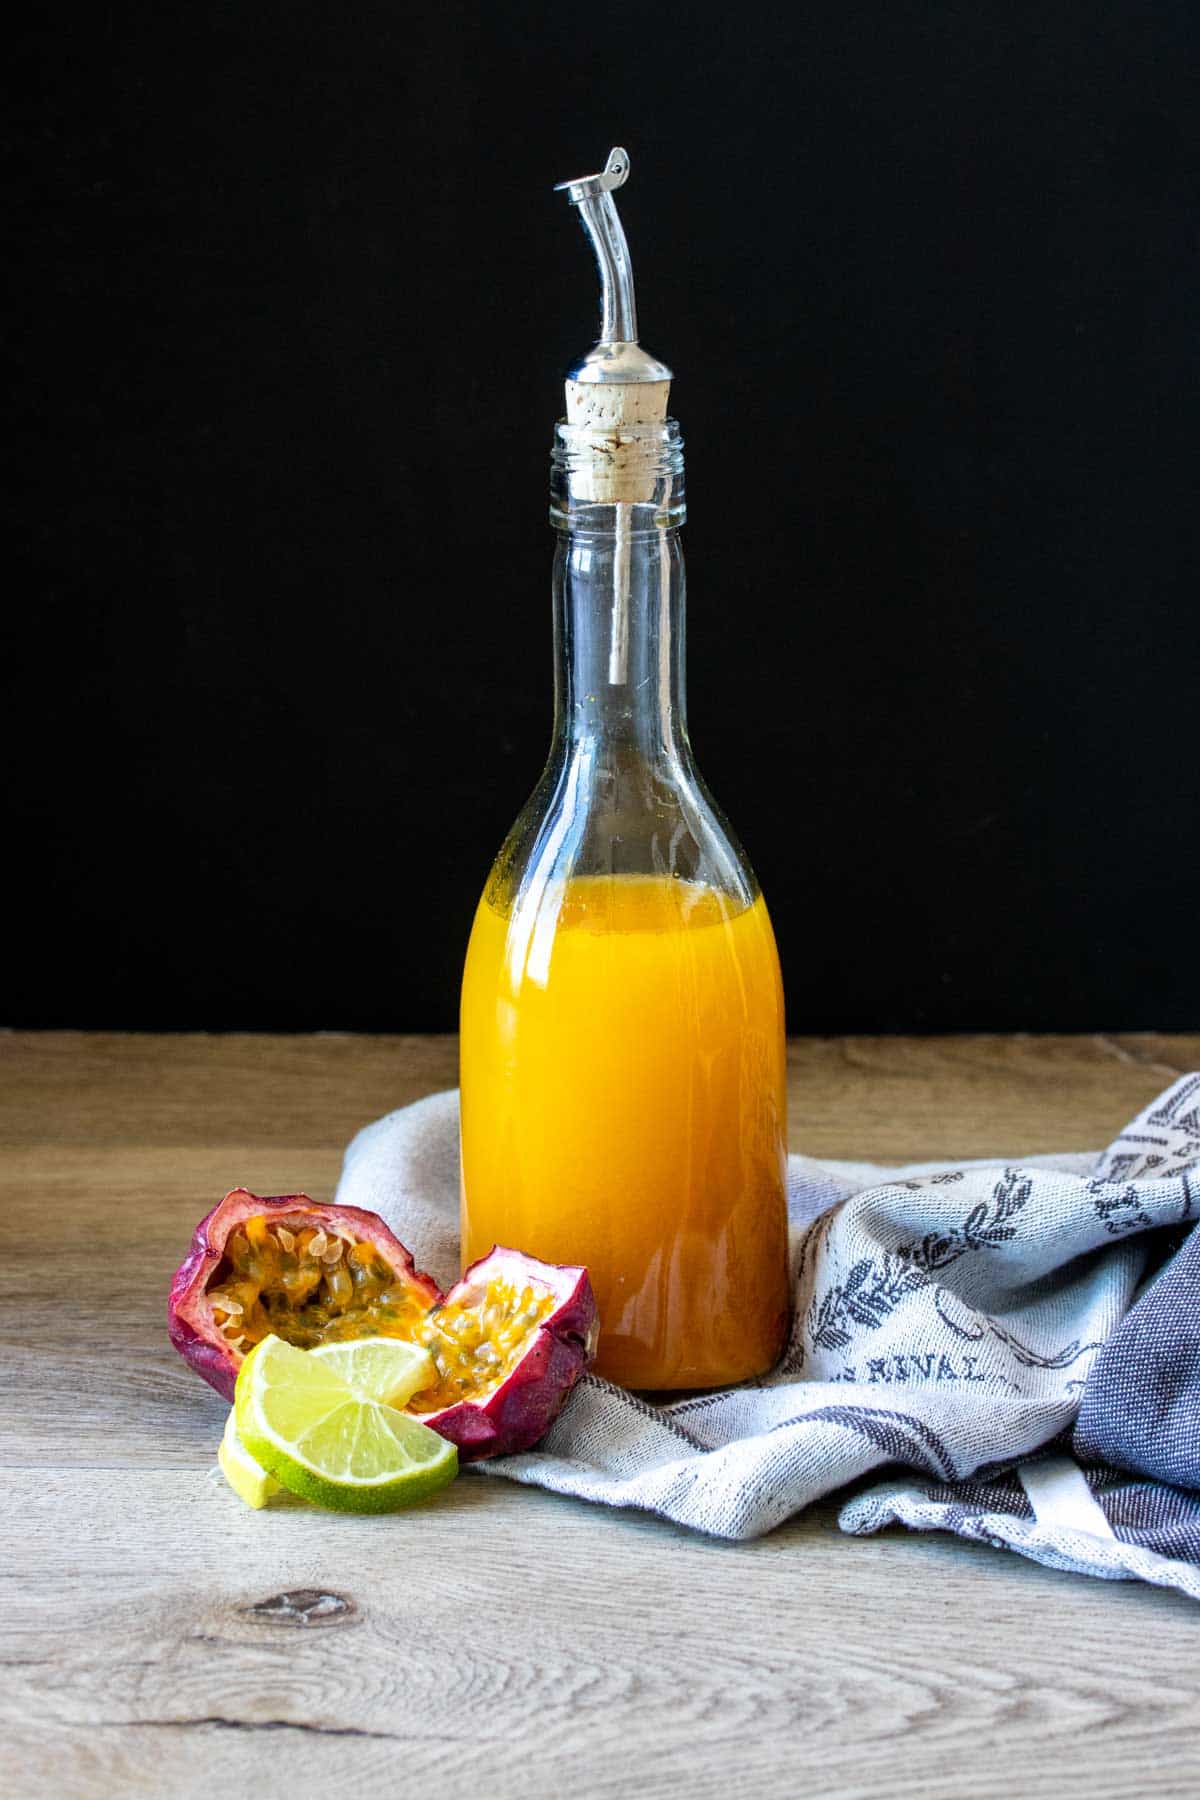 A glass bottle filled with orange liquid sitting on a towel next to limes and passion fruit